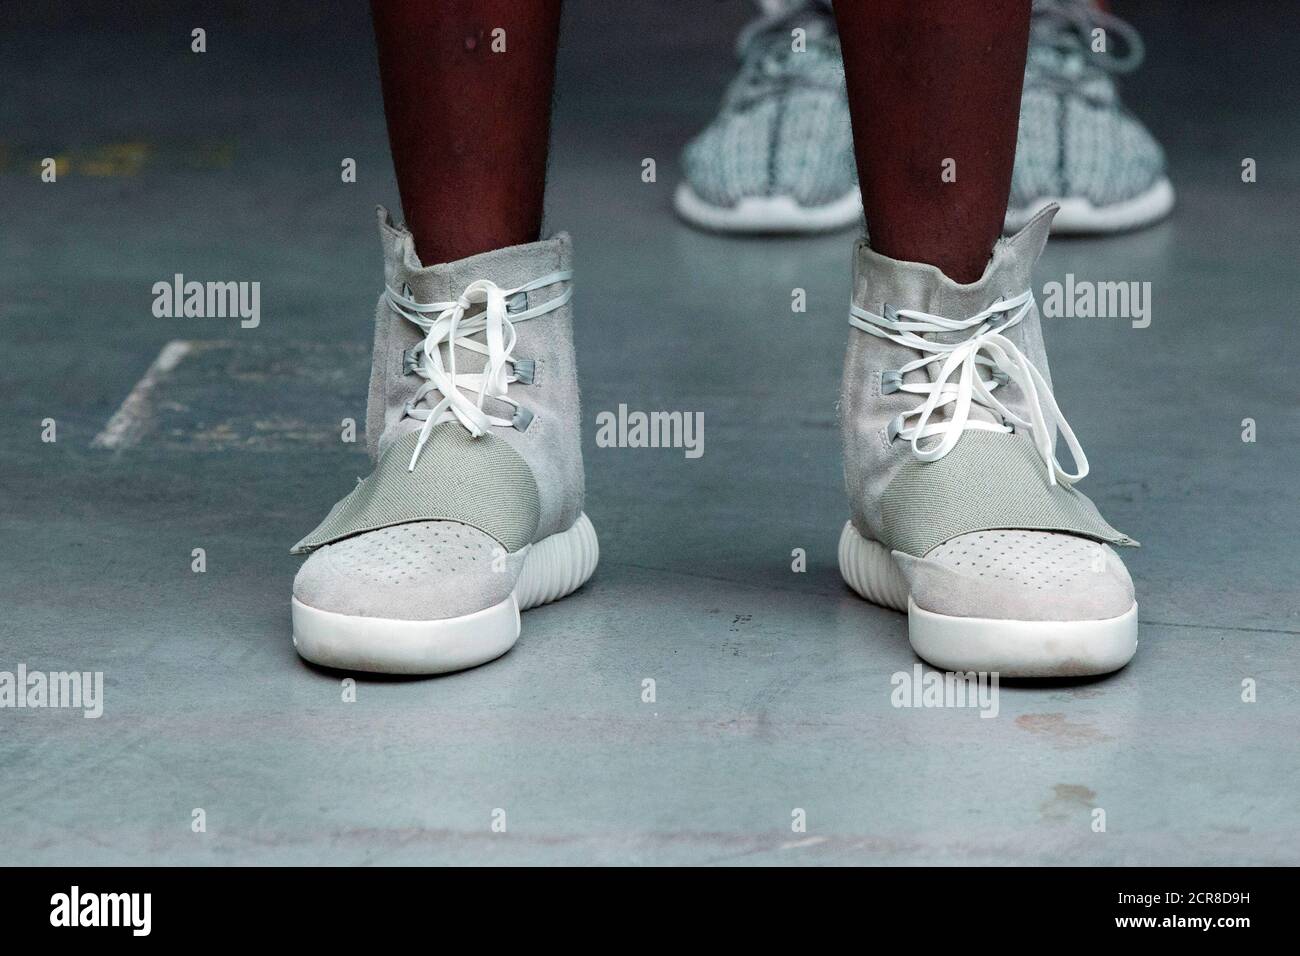 A wears a pair of Adidas Yeezy 750 Boost shoes designed Kanye West as part of his Fall/Winter 2015 partnership line with Adidas at New York Fashion Week, U.S. February